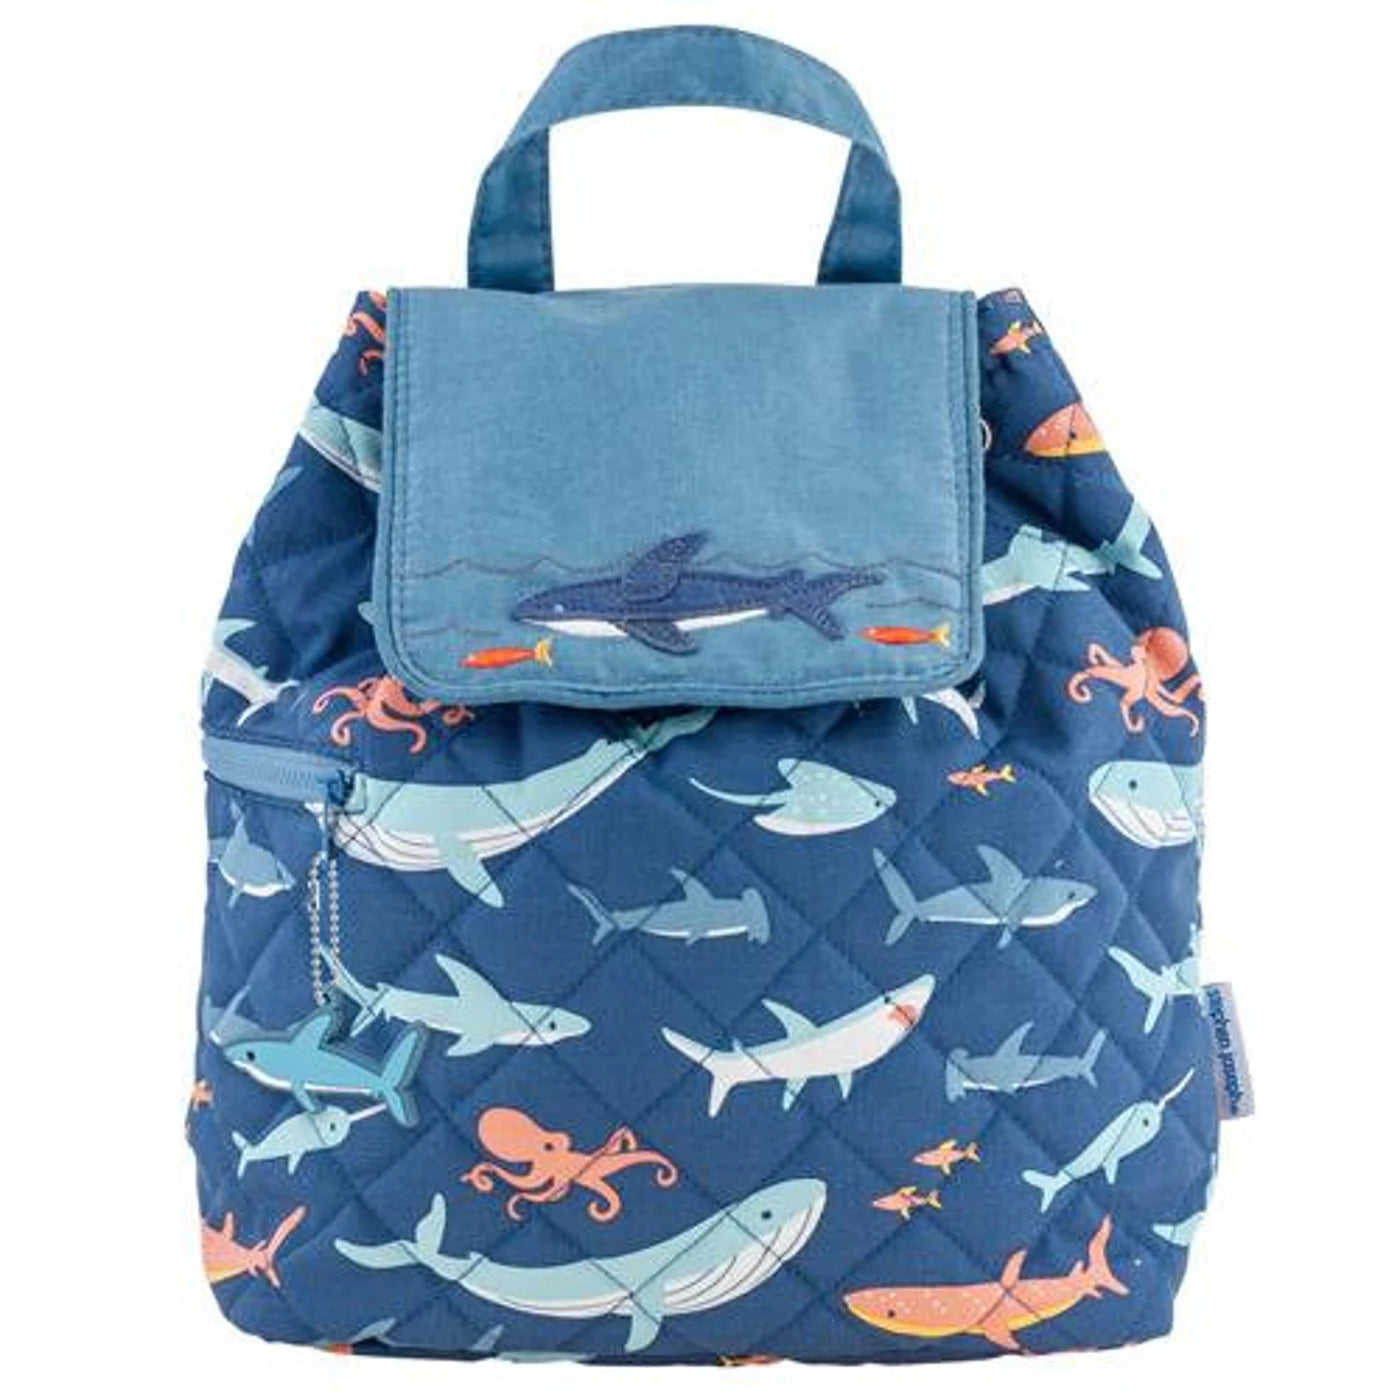 QUILTED BACKPACK ALL OVER SHARKS by Stephen Joseph